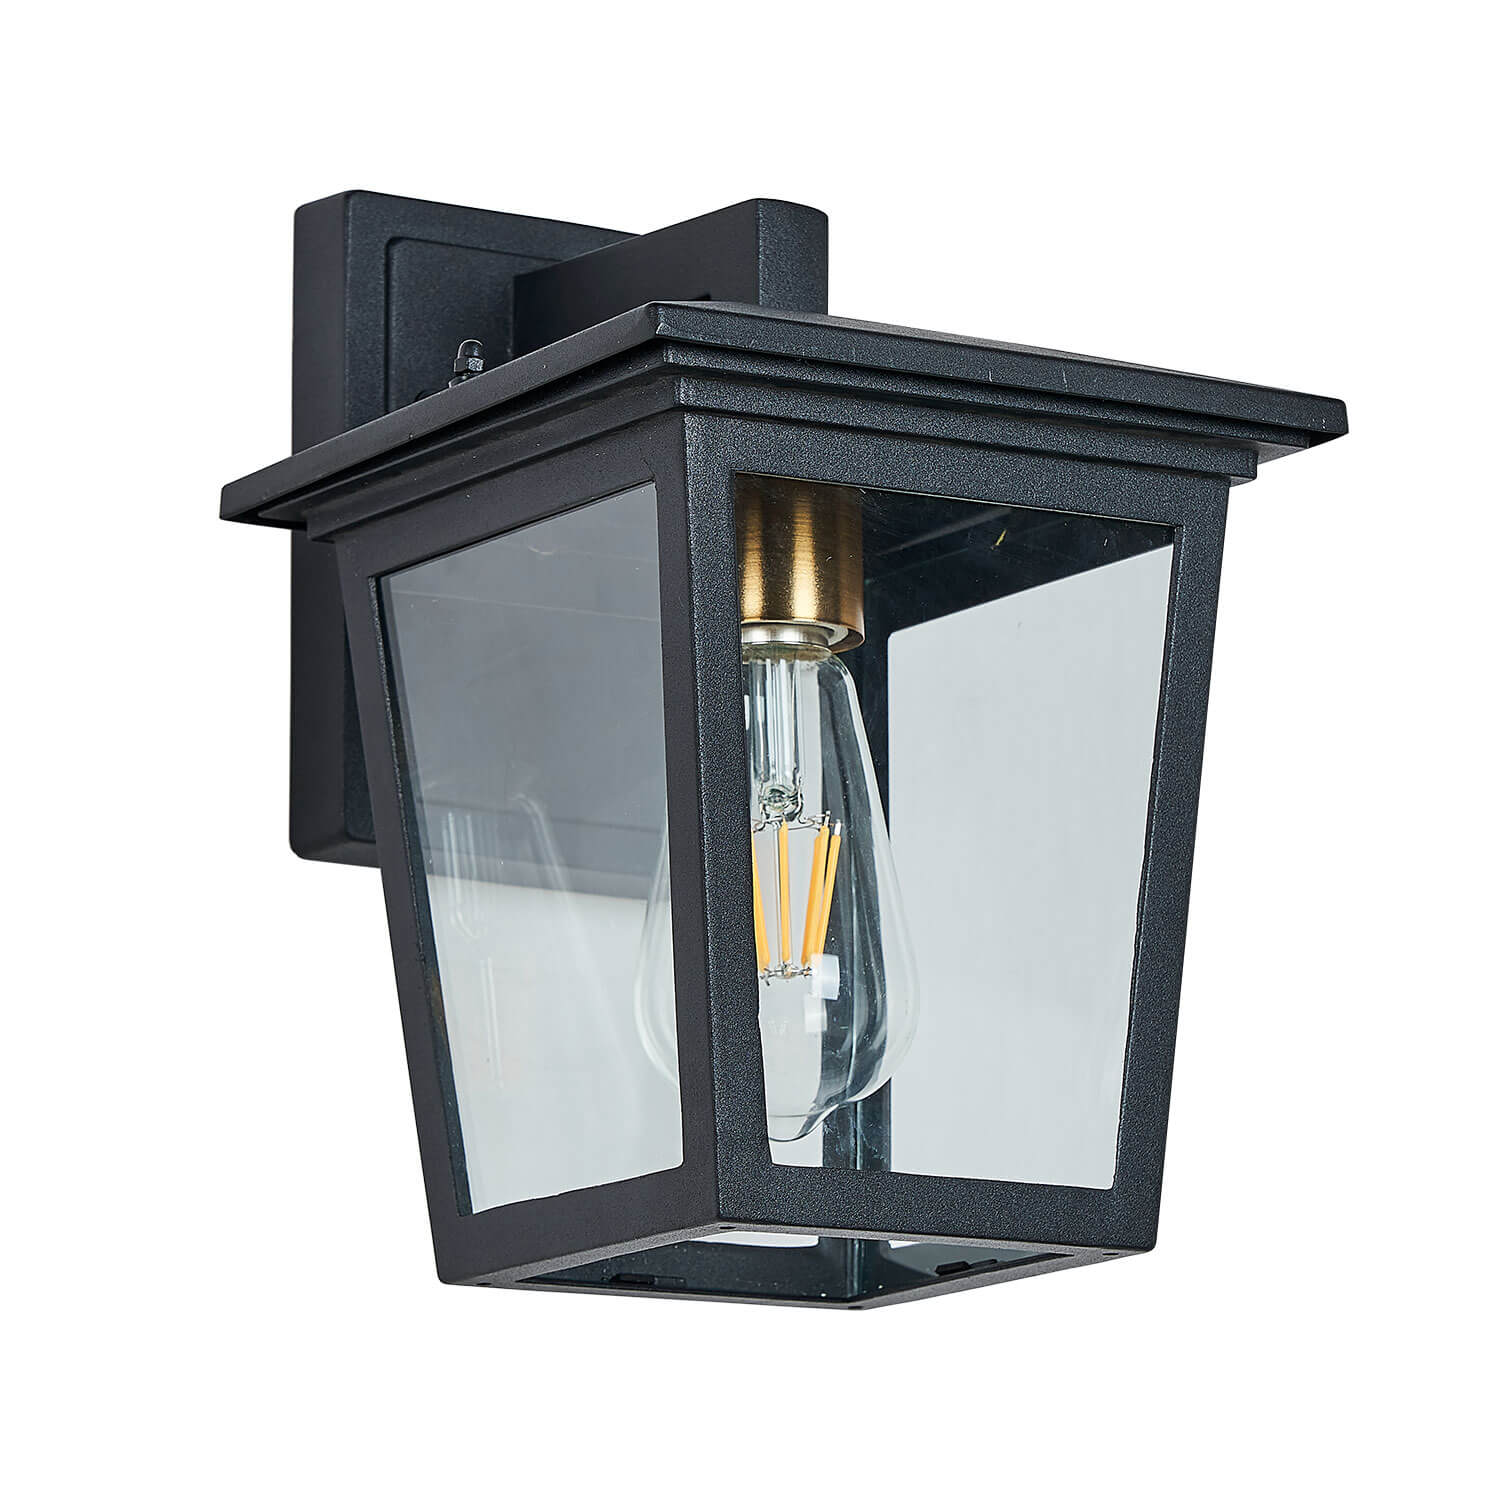 Rustic-Matte-Black-Metal-Frame-Outdoor-Wall-Sconce